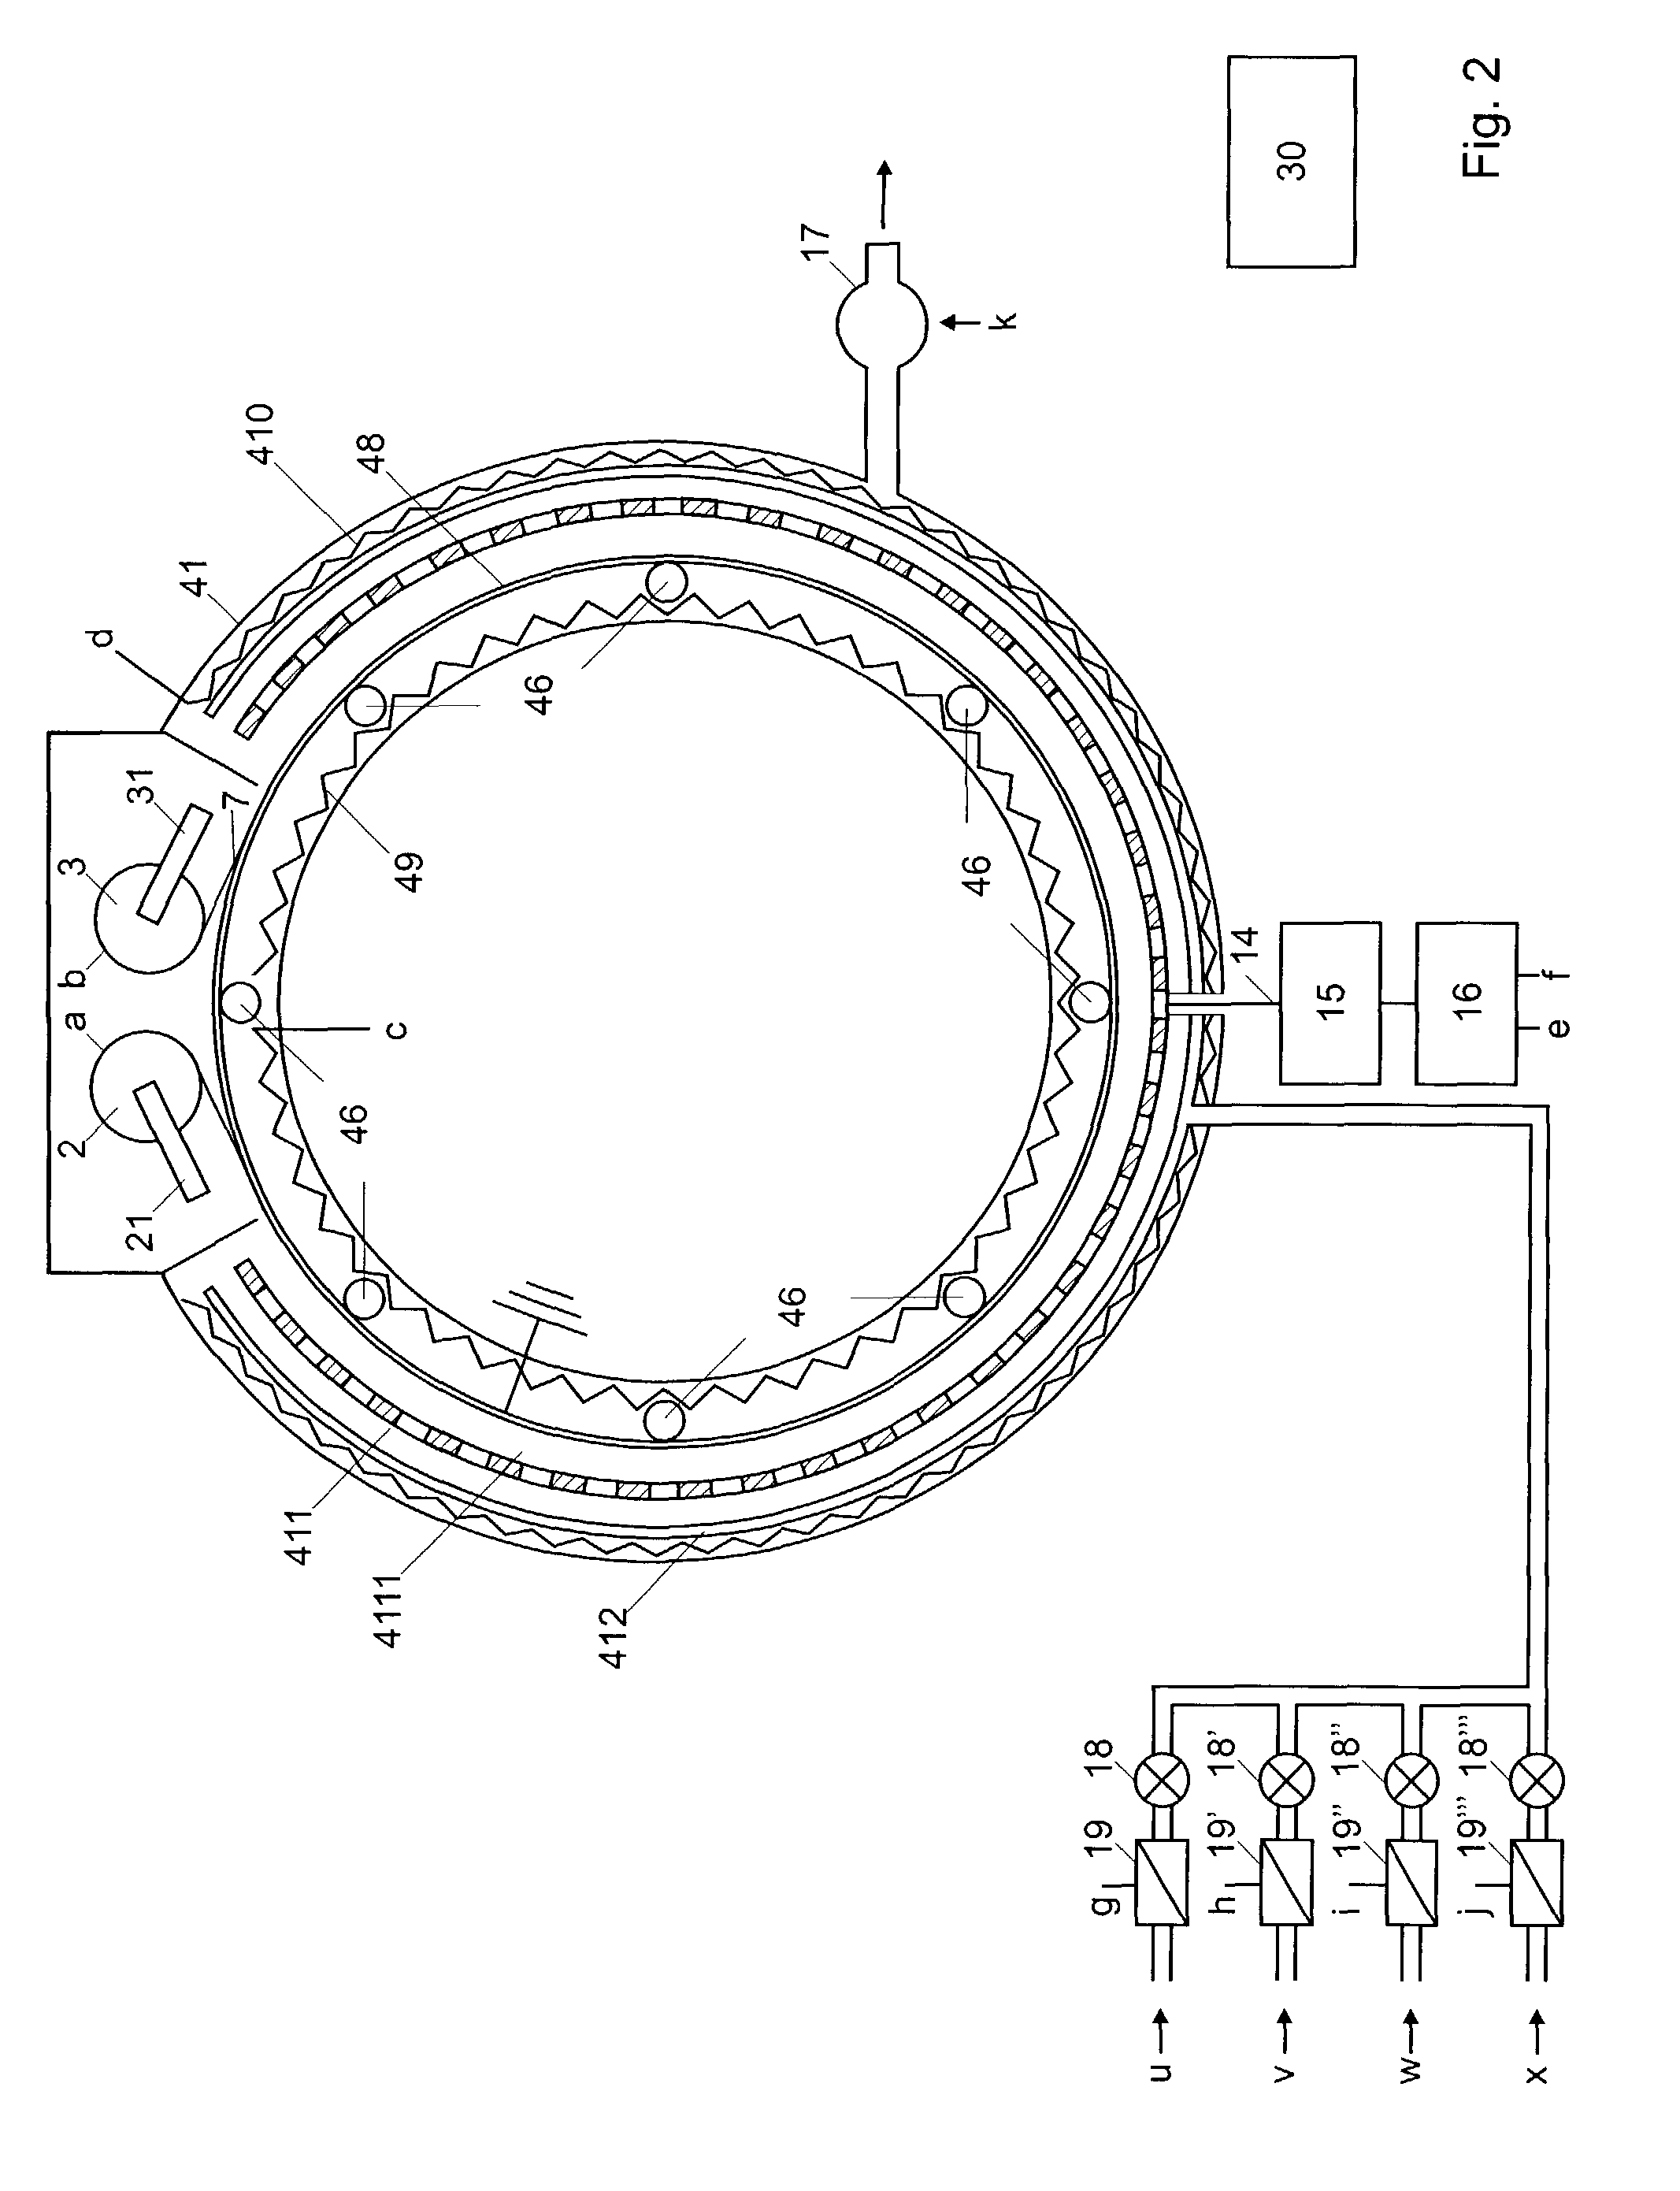 Apparatus and method for the production of flexible semiconductor devices